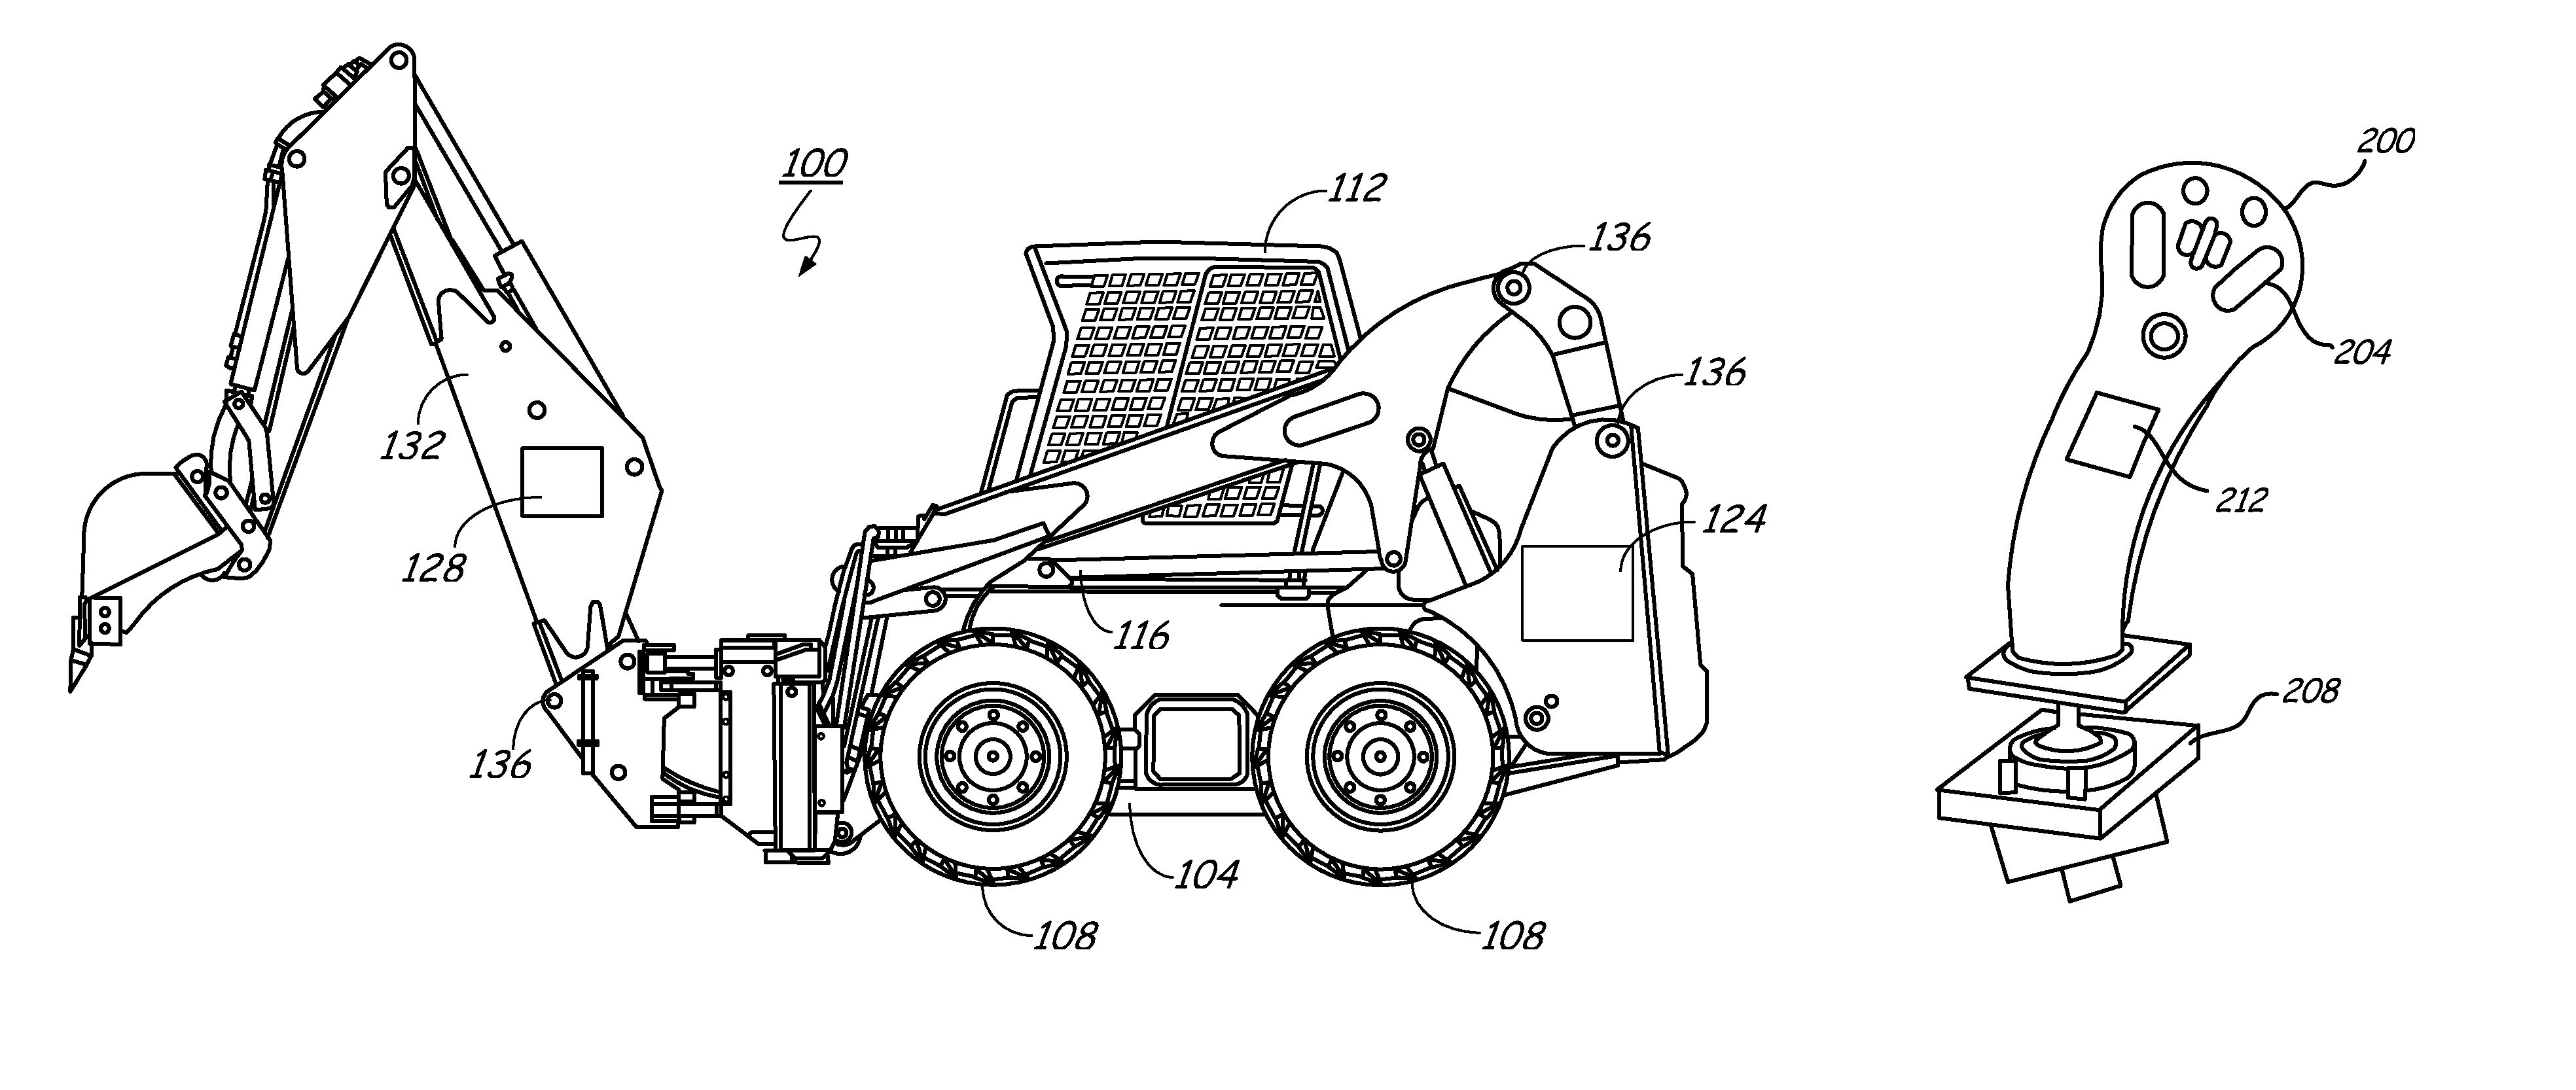 Carrier and backhoe control system and method